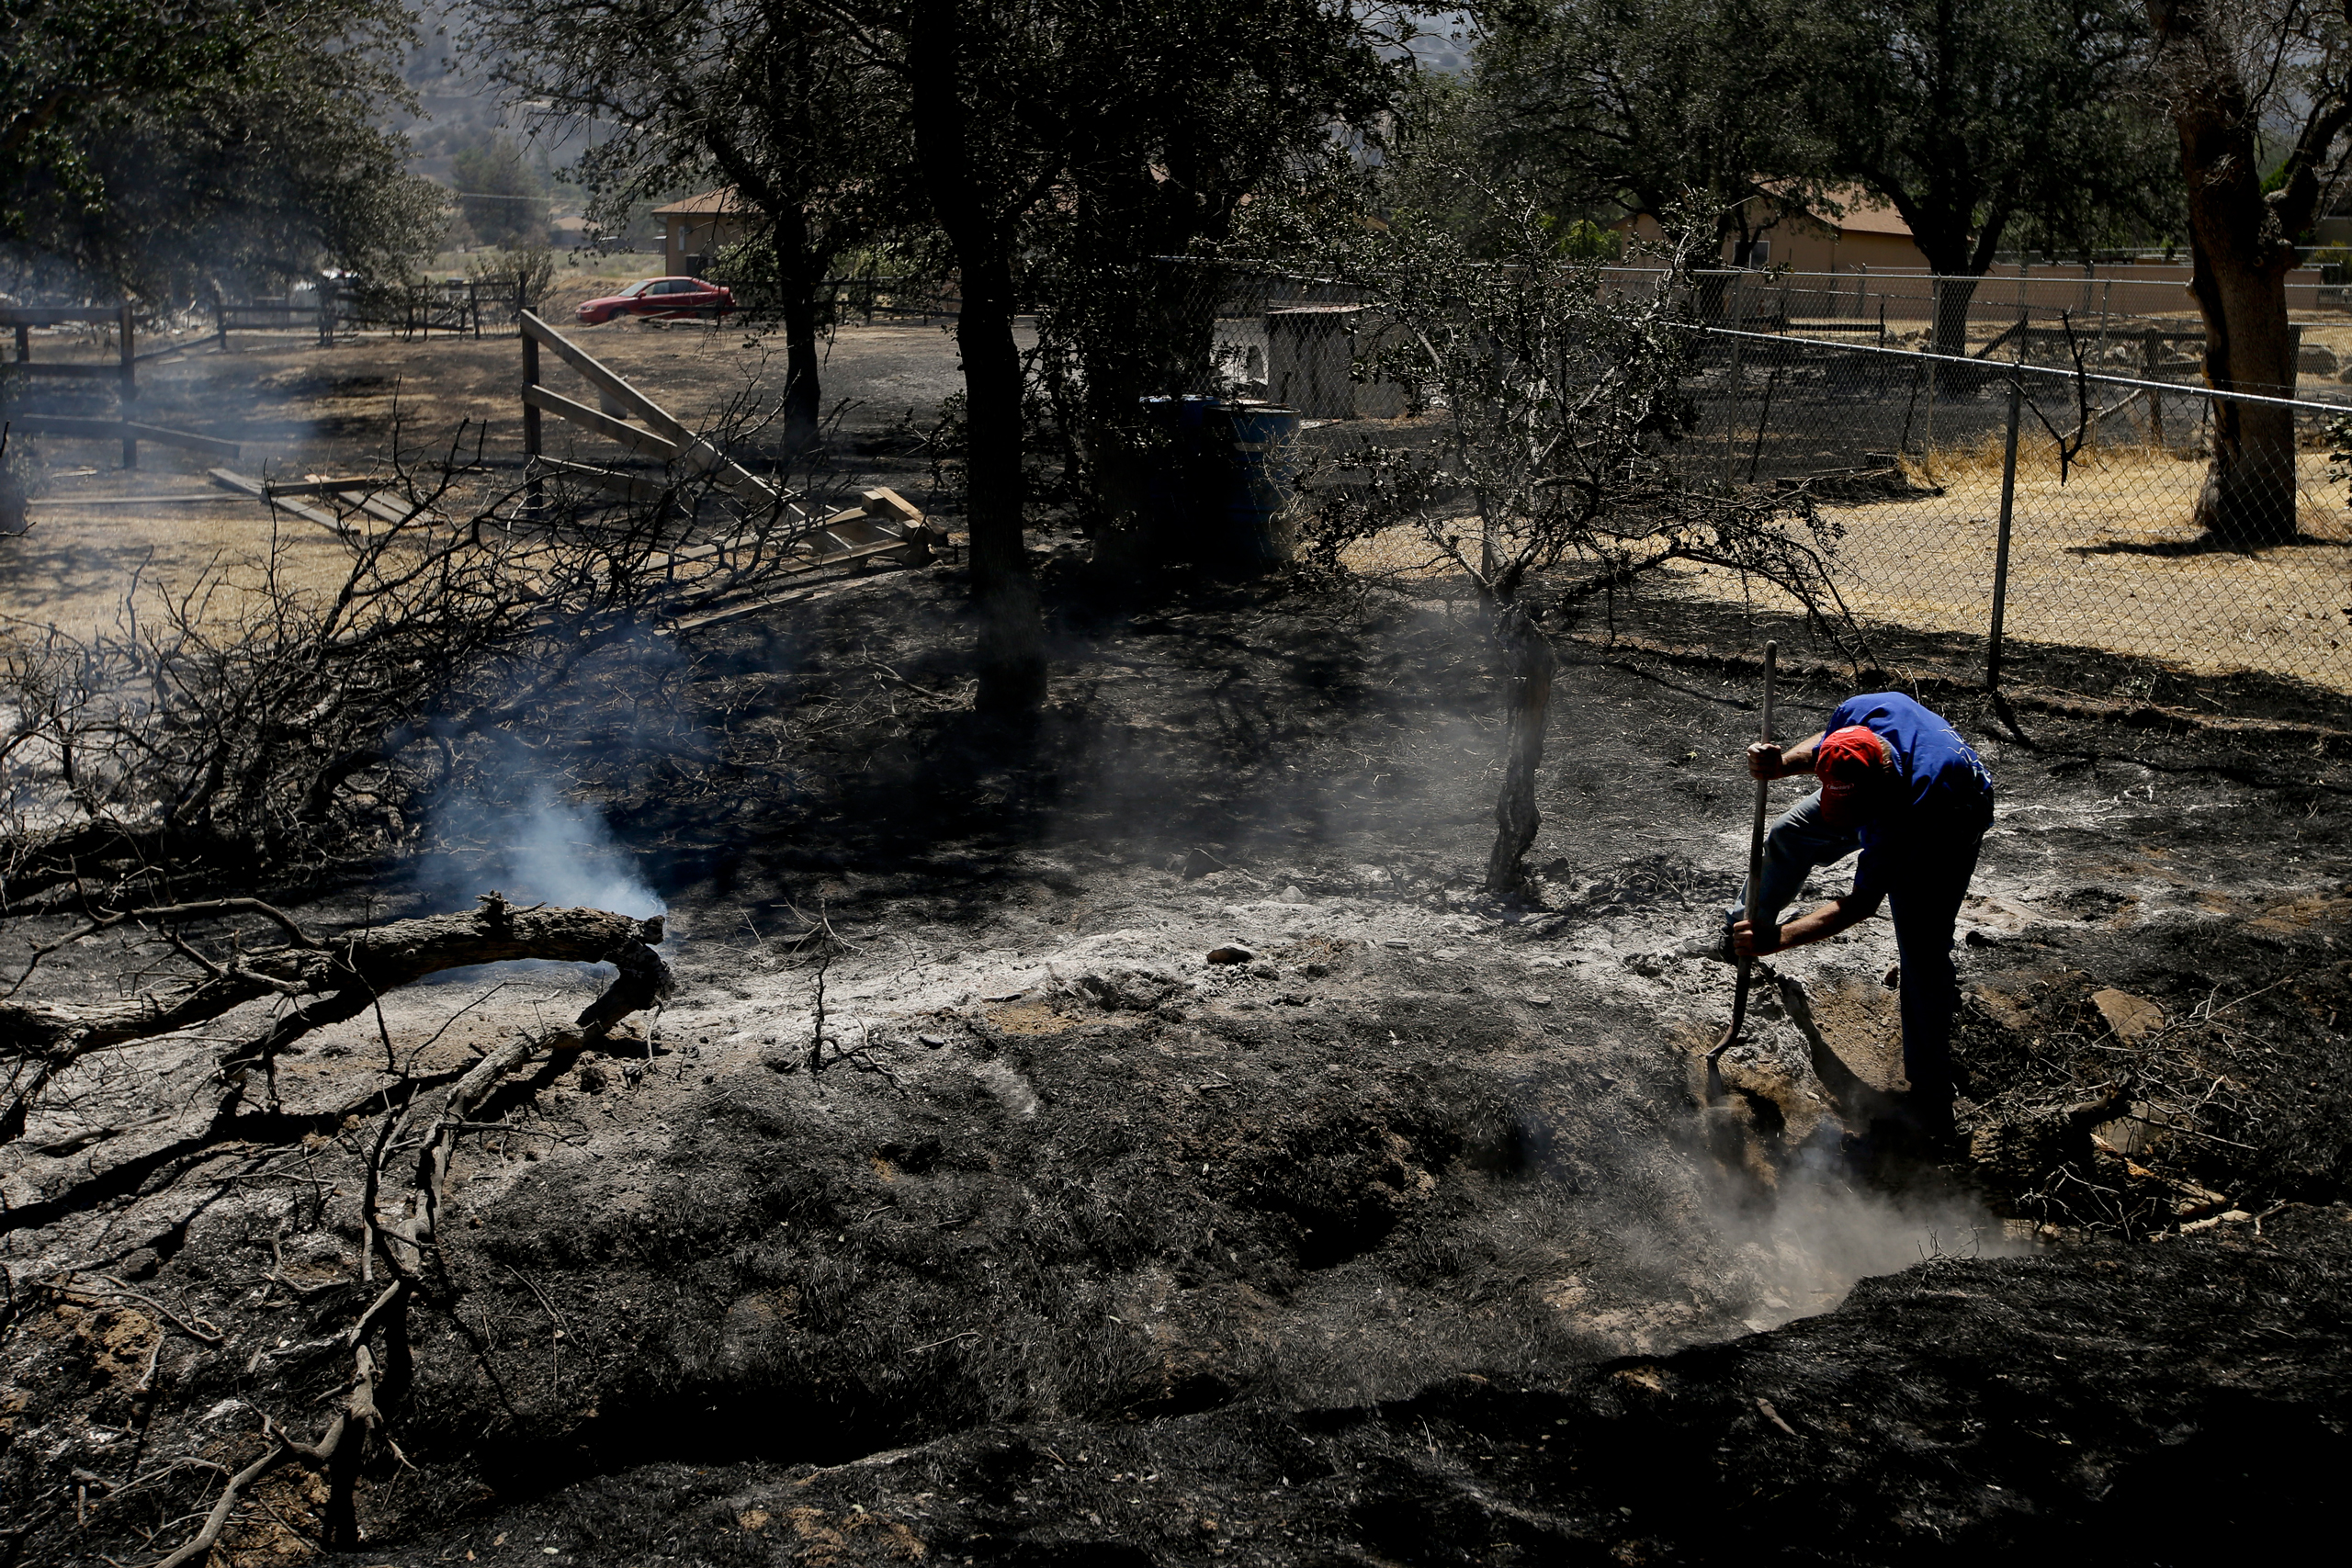 Alan Germain puts out hotspots on his neighbor's property destroyed by a wildfire near Lake Isabella, Calif., on June 24, 2016. (Jae C. Hong—AP)